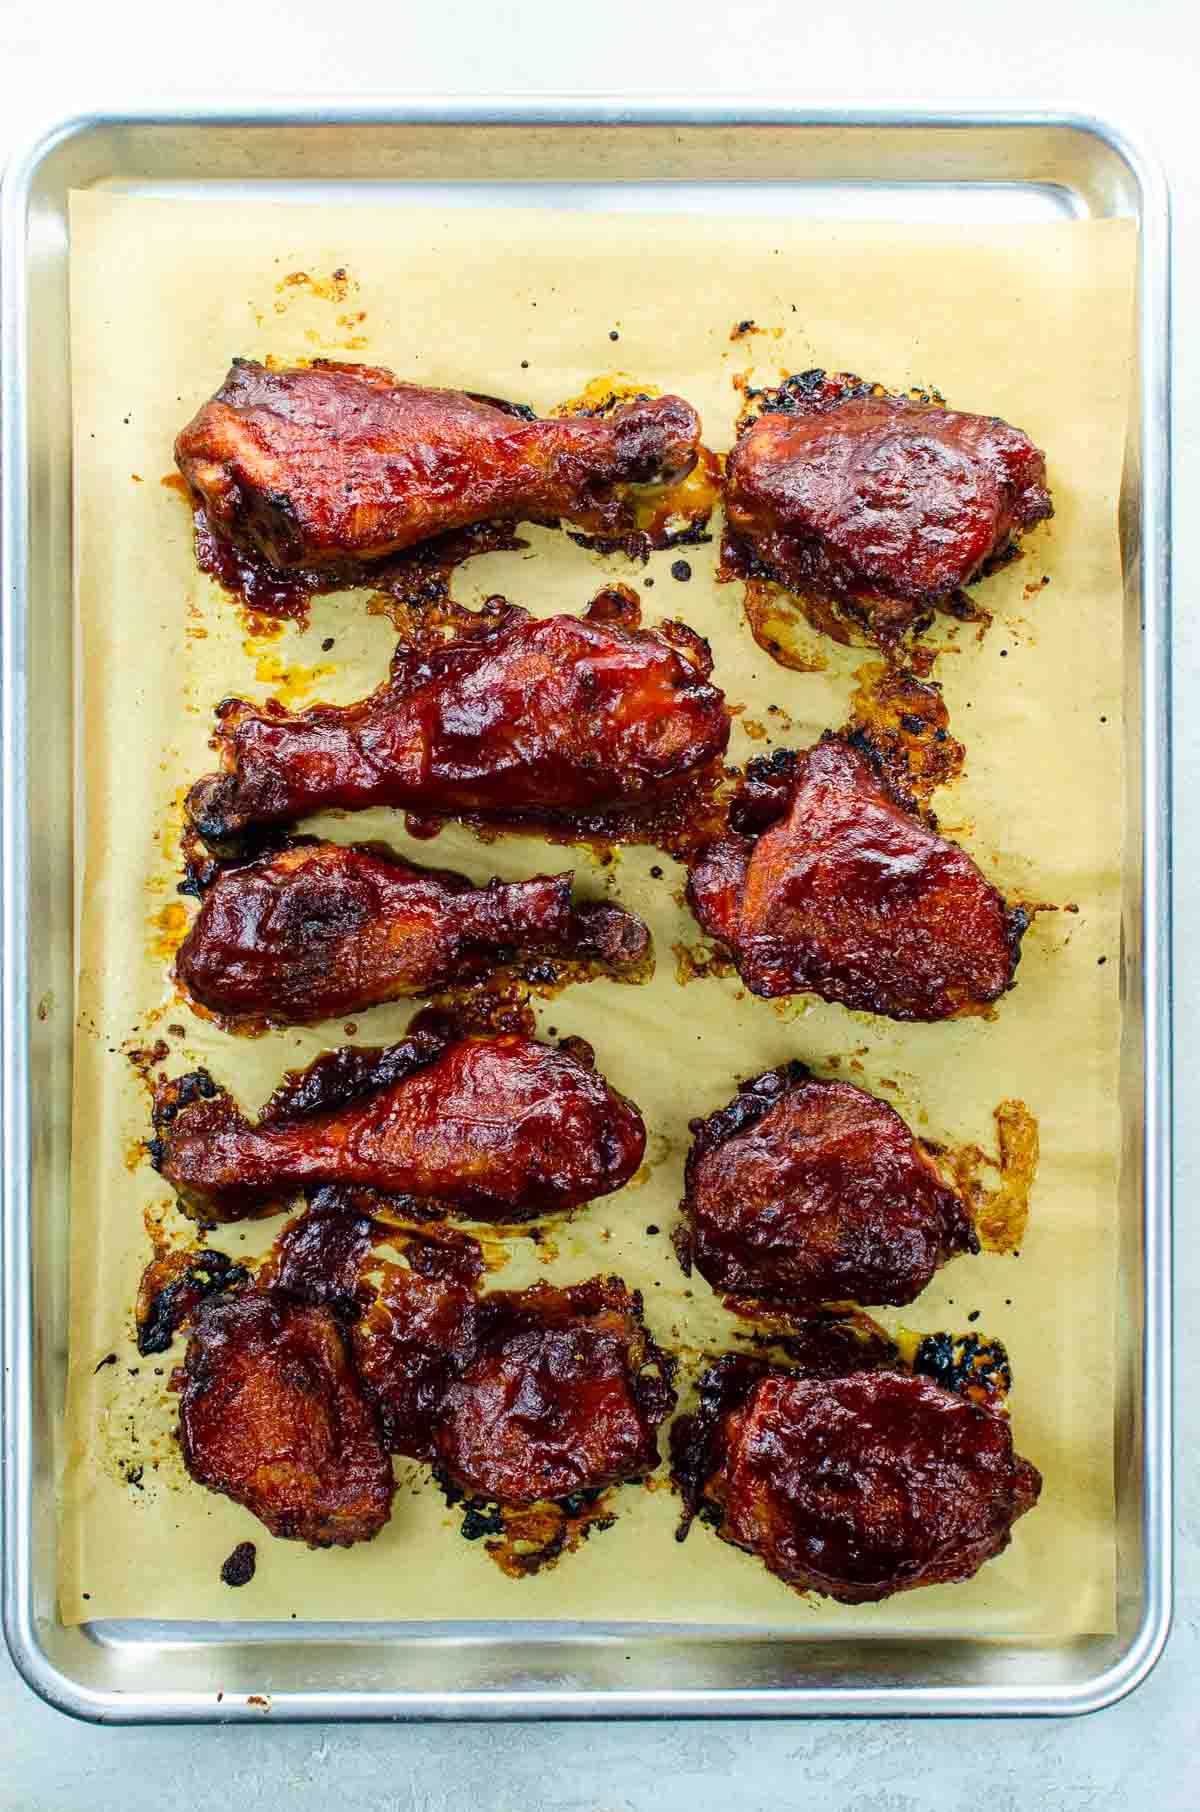 Baked BBQ Chicken Thighs and Legs on a sheet pan